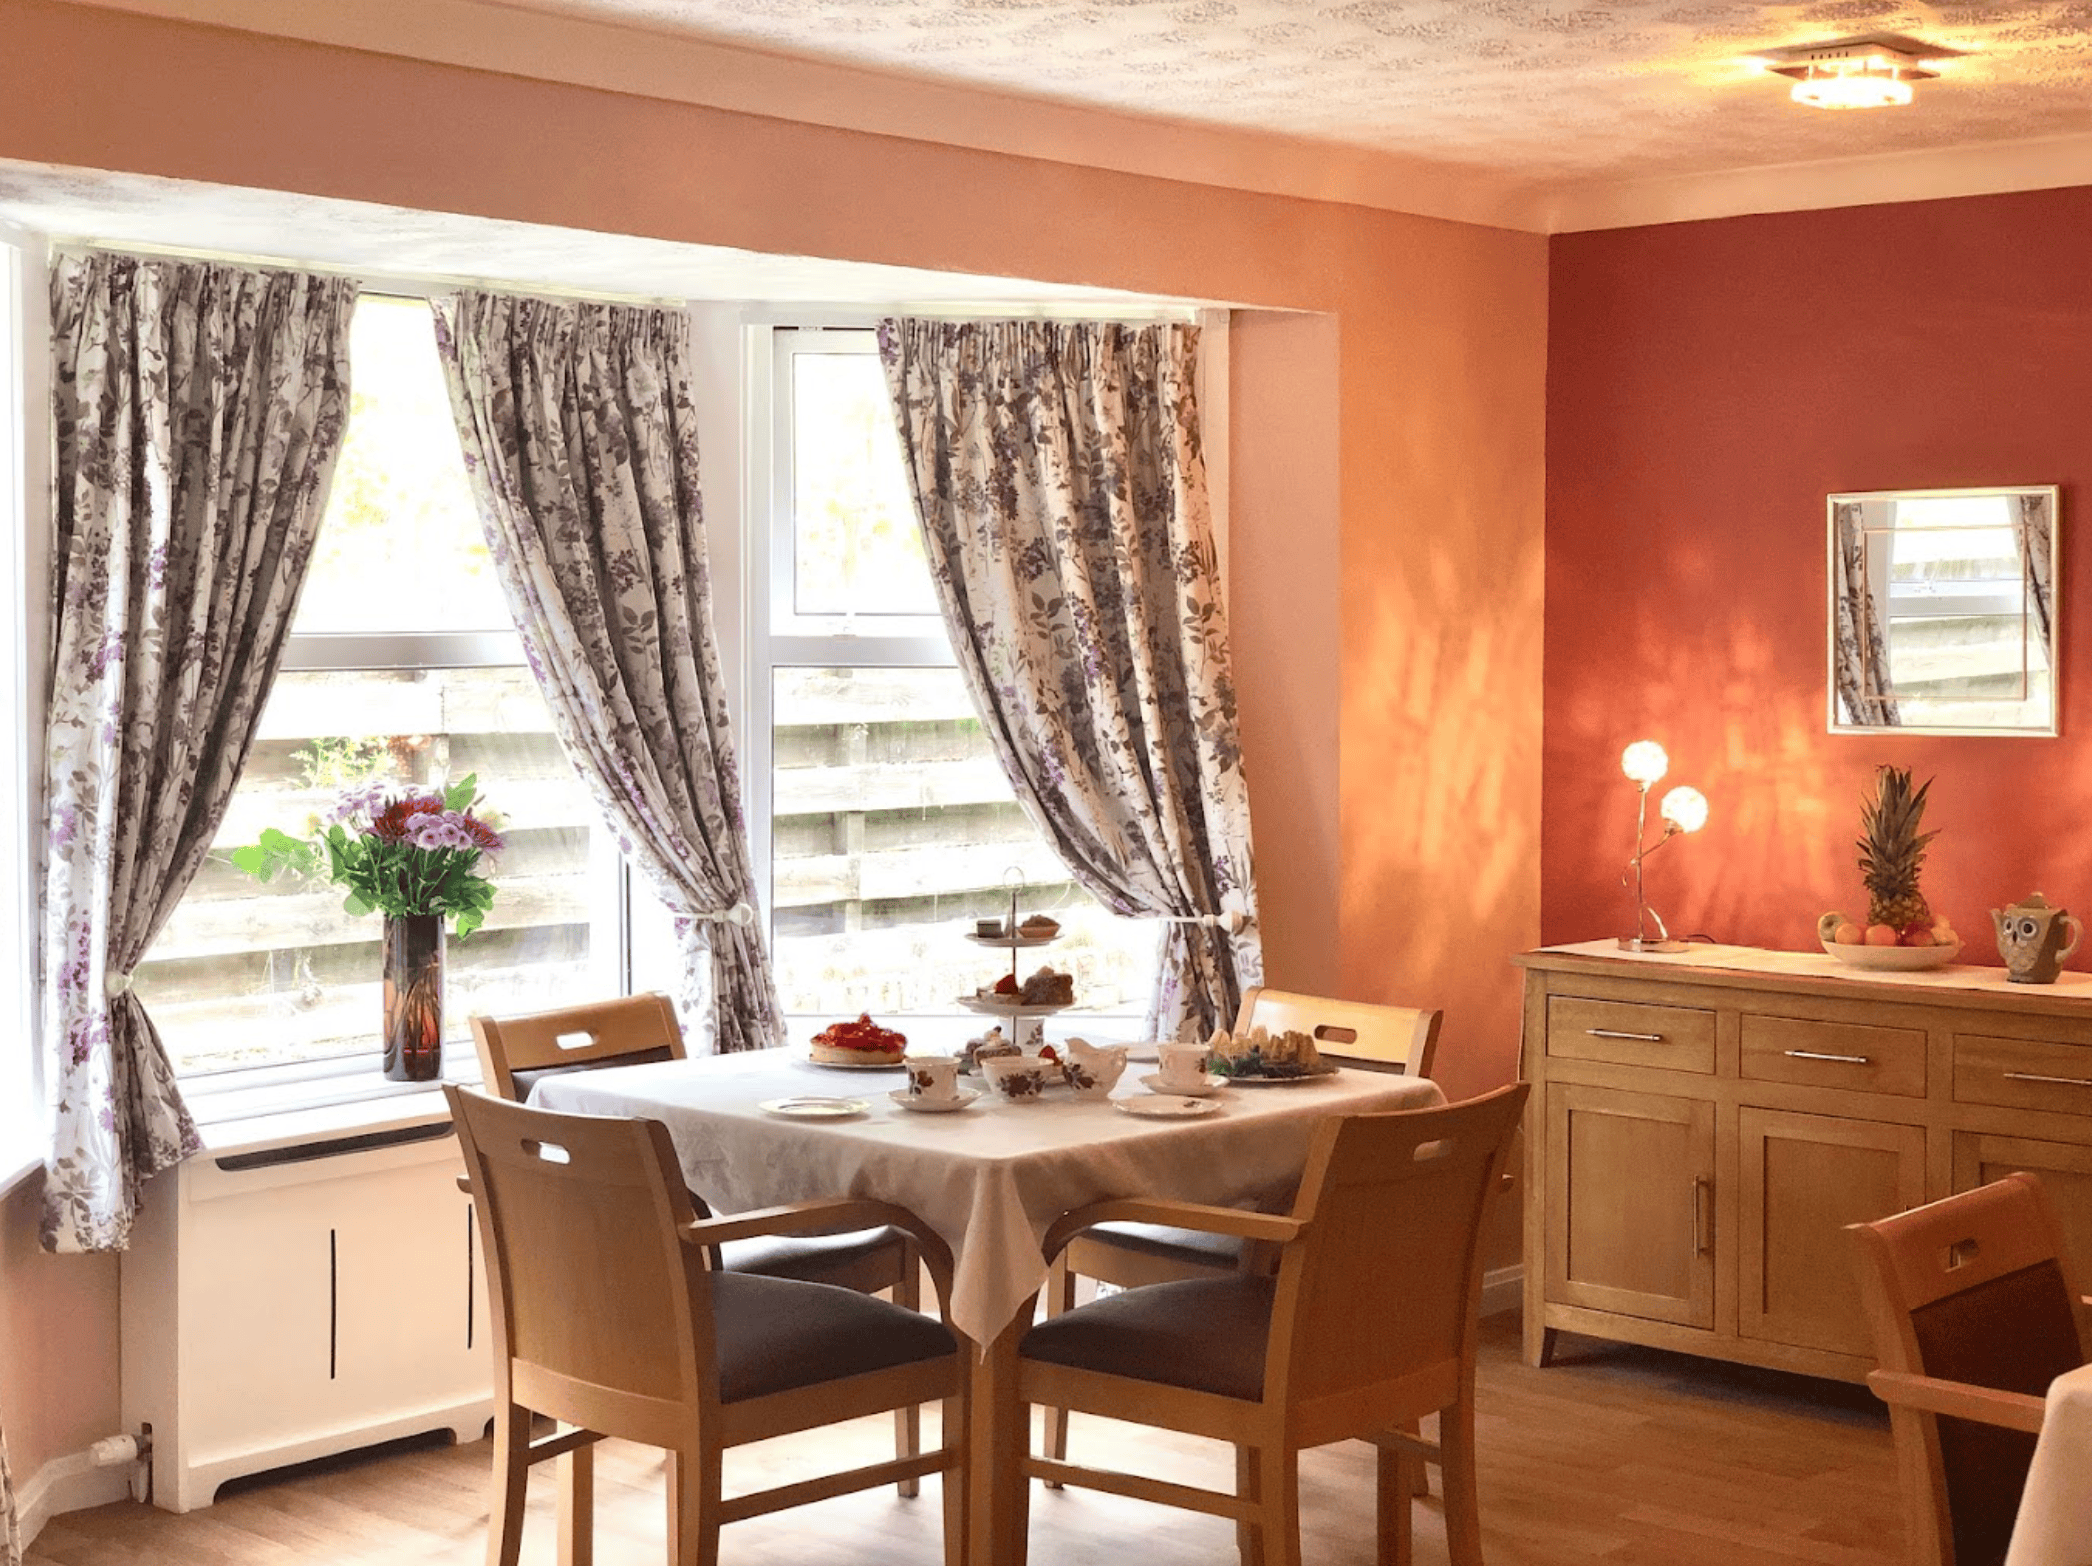 Dining room of Burnfoot care home in Ayr, Scotland